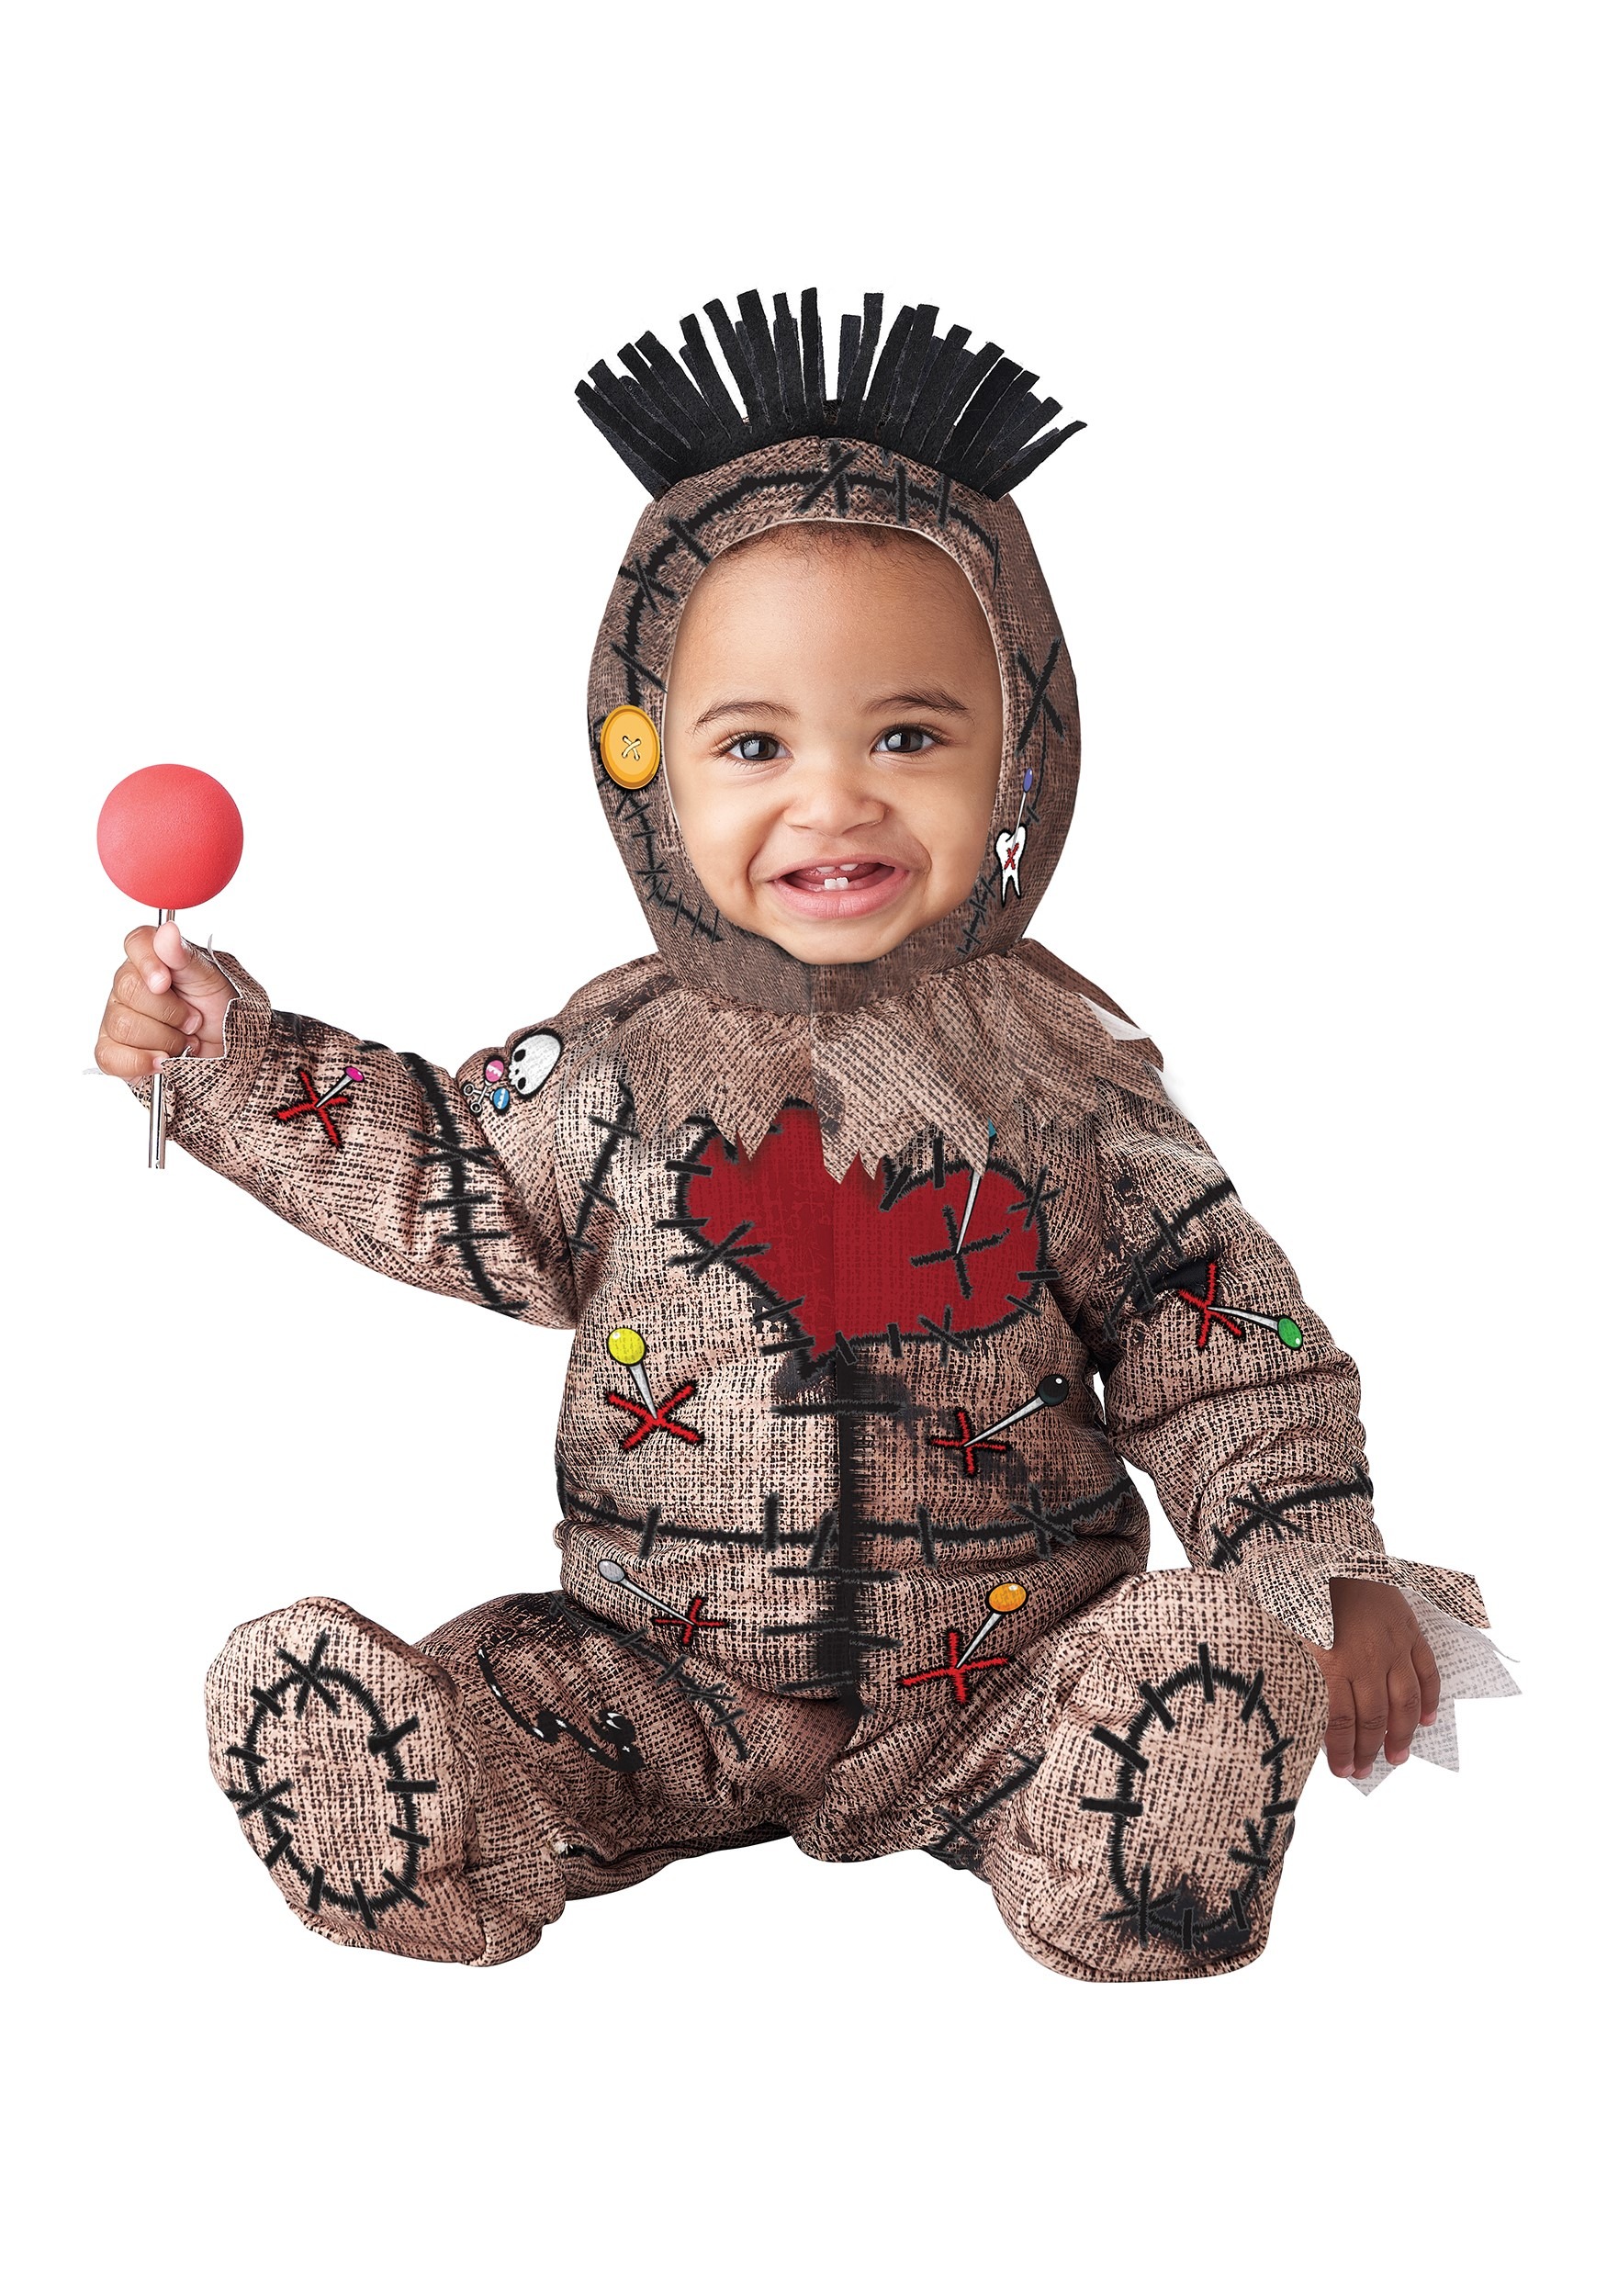 Photos - Fancy Dress California Costume Collection Voodoo Baby Doll Infant Costume Black/Re 